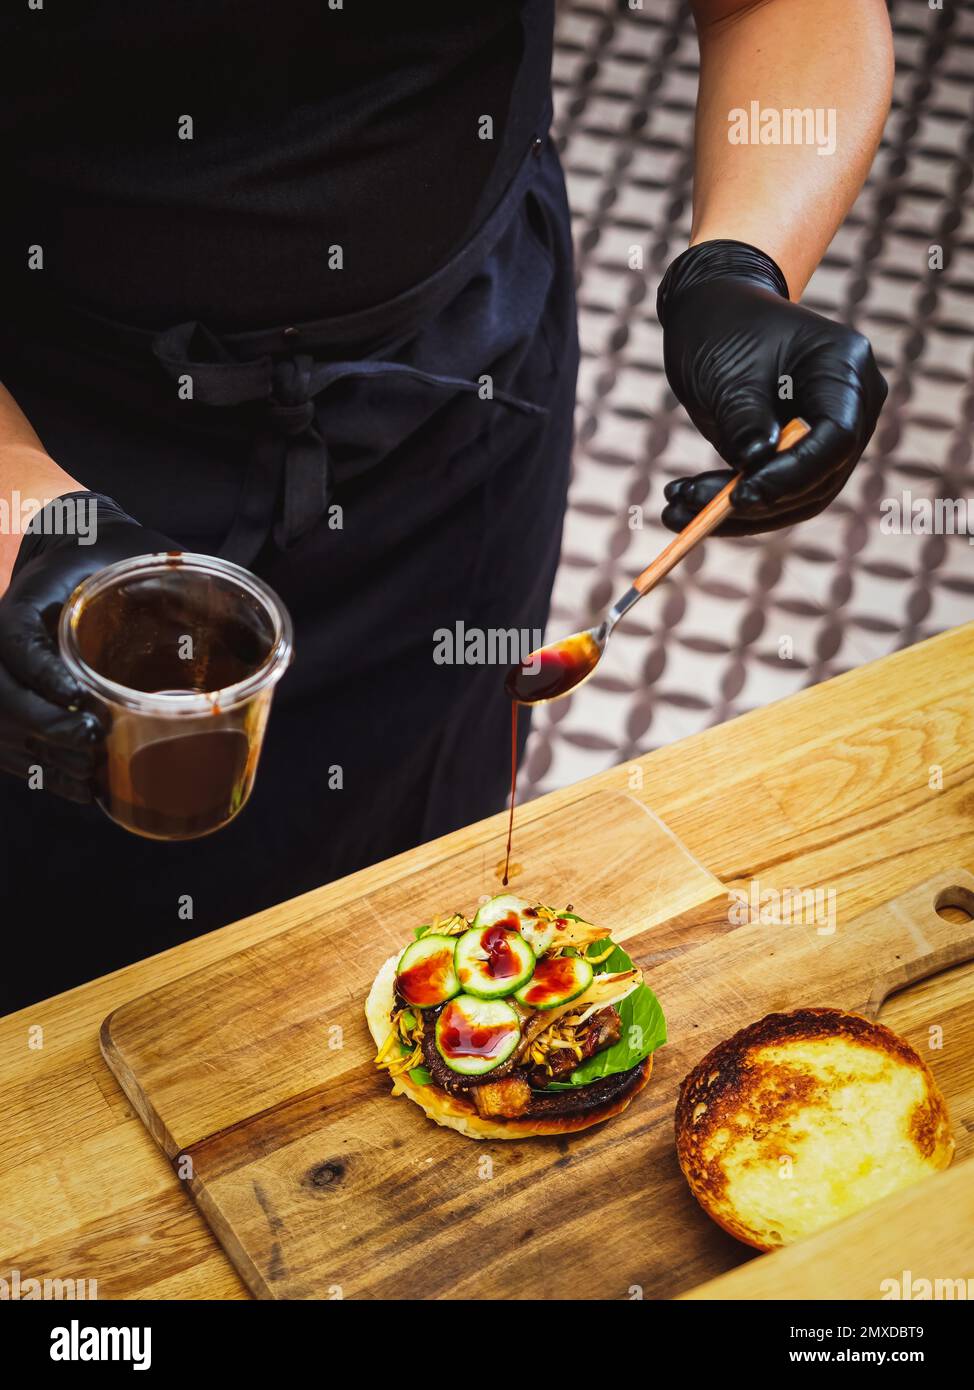 cook hands dripping teriyaki sauce on a fresh made tasty burger in a kitchen Stock Photo